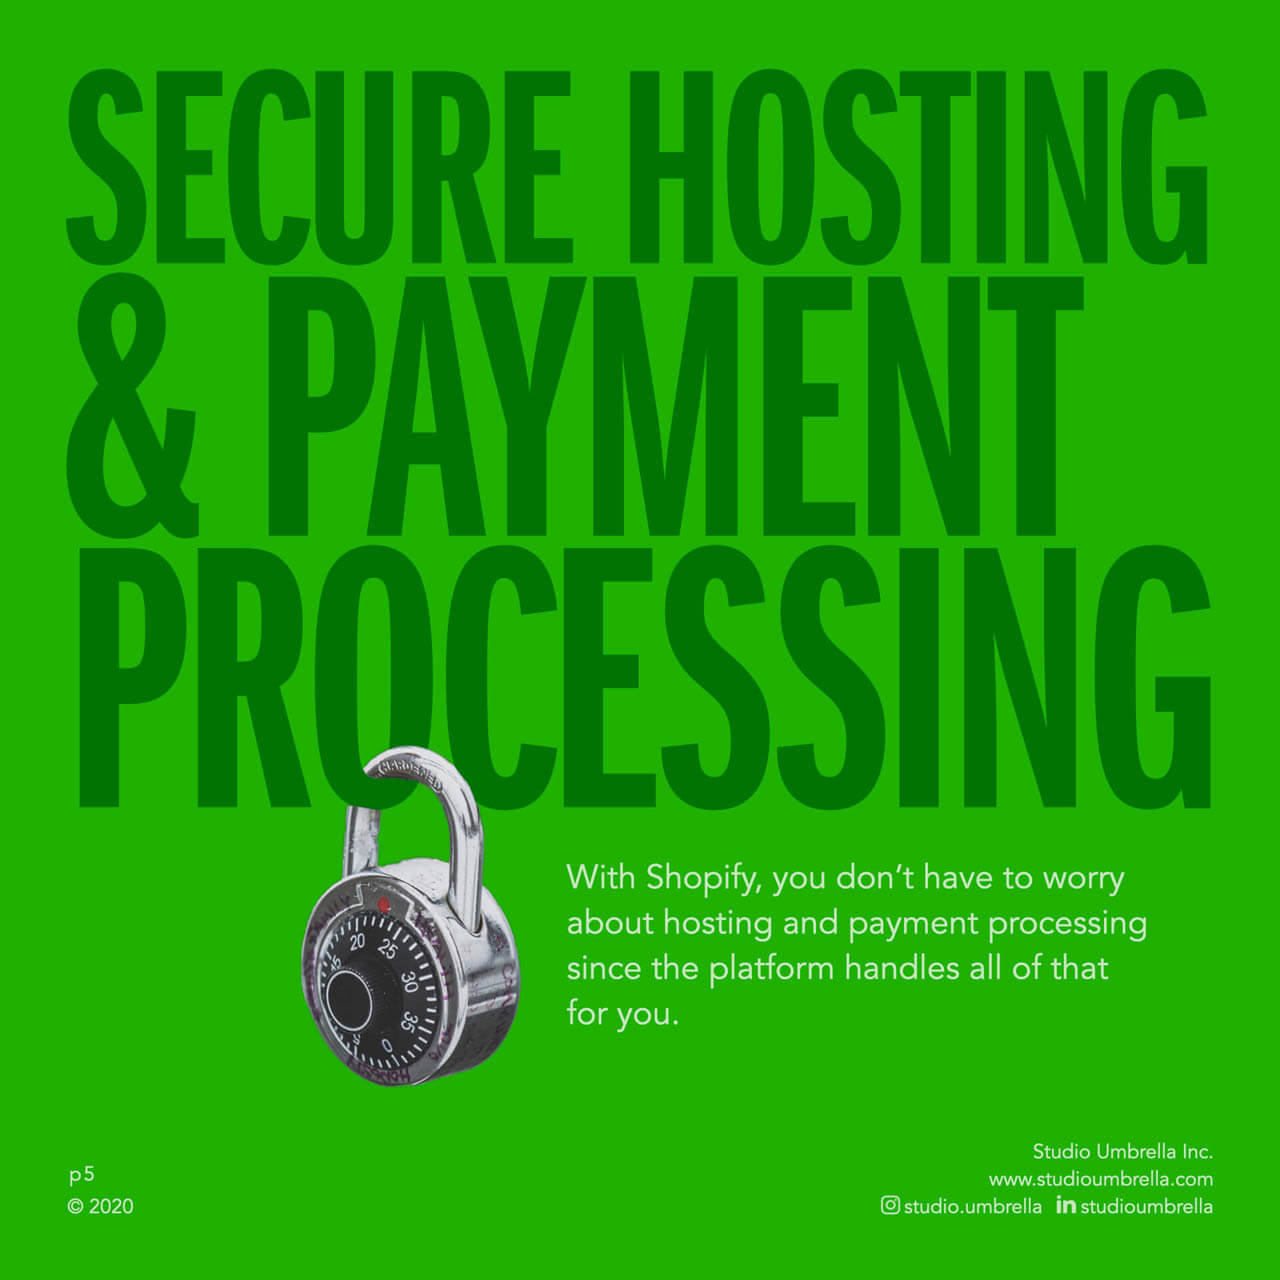 Secure hosting & payment processing